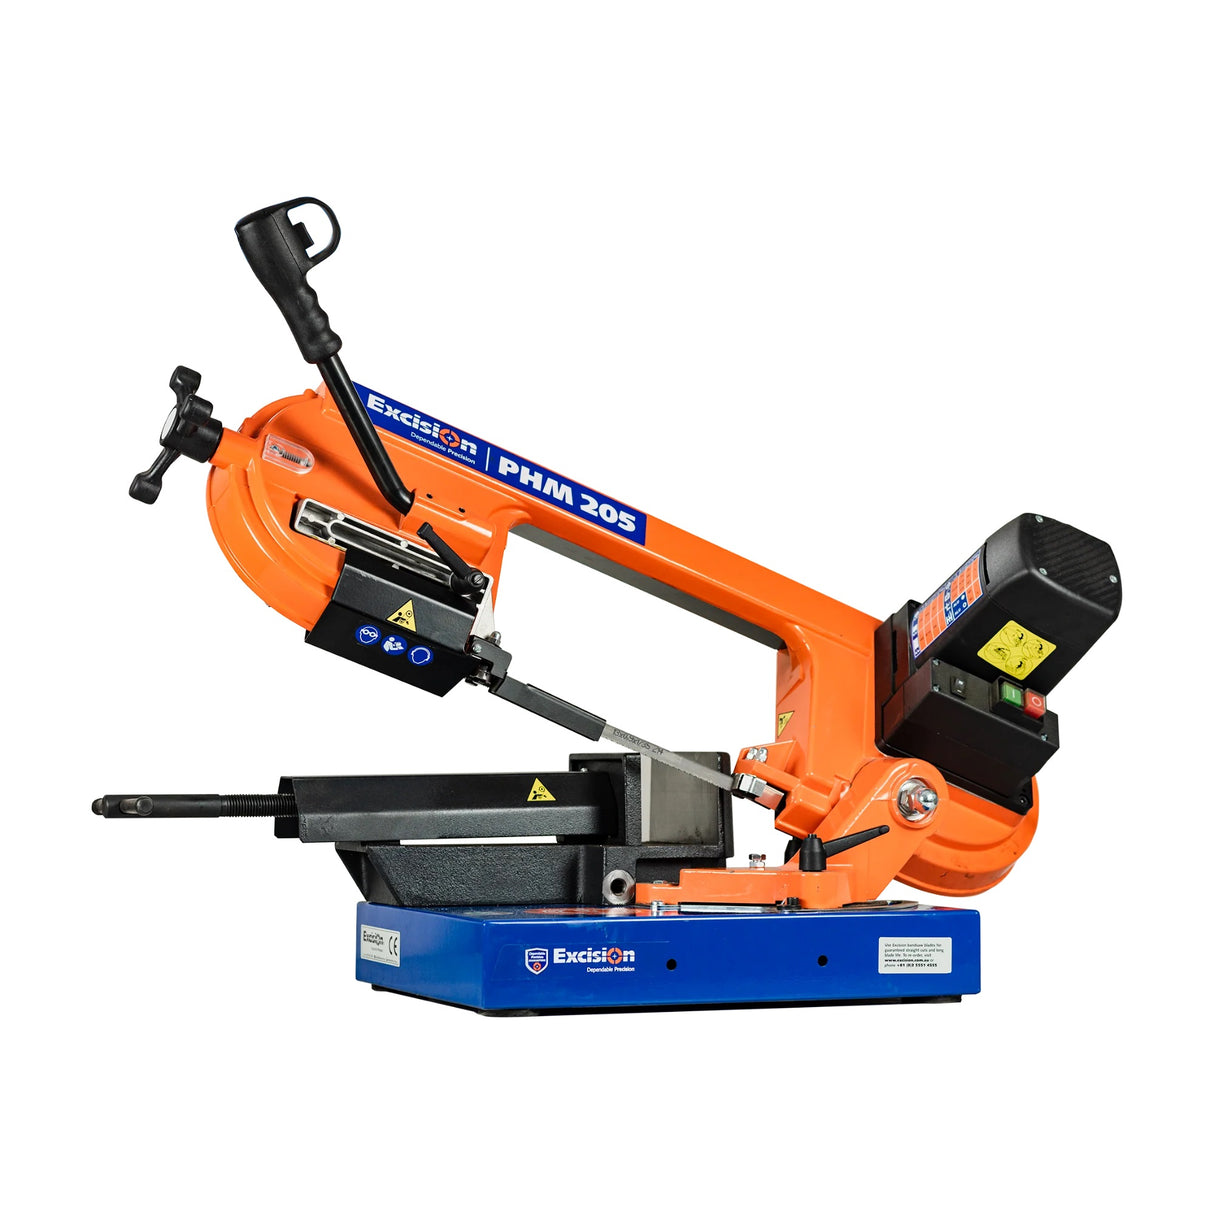 PHM 205 Portable Bandsaw